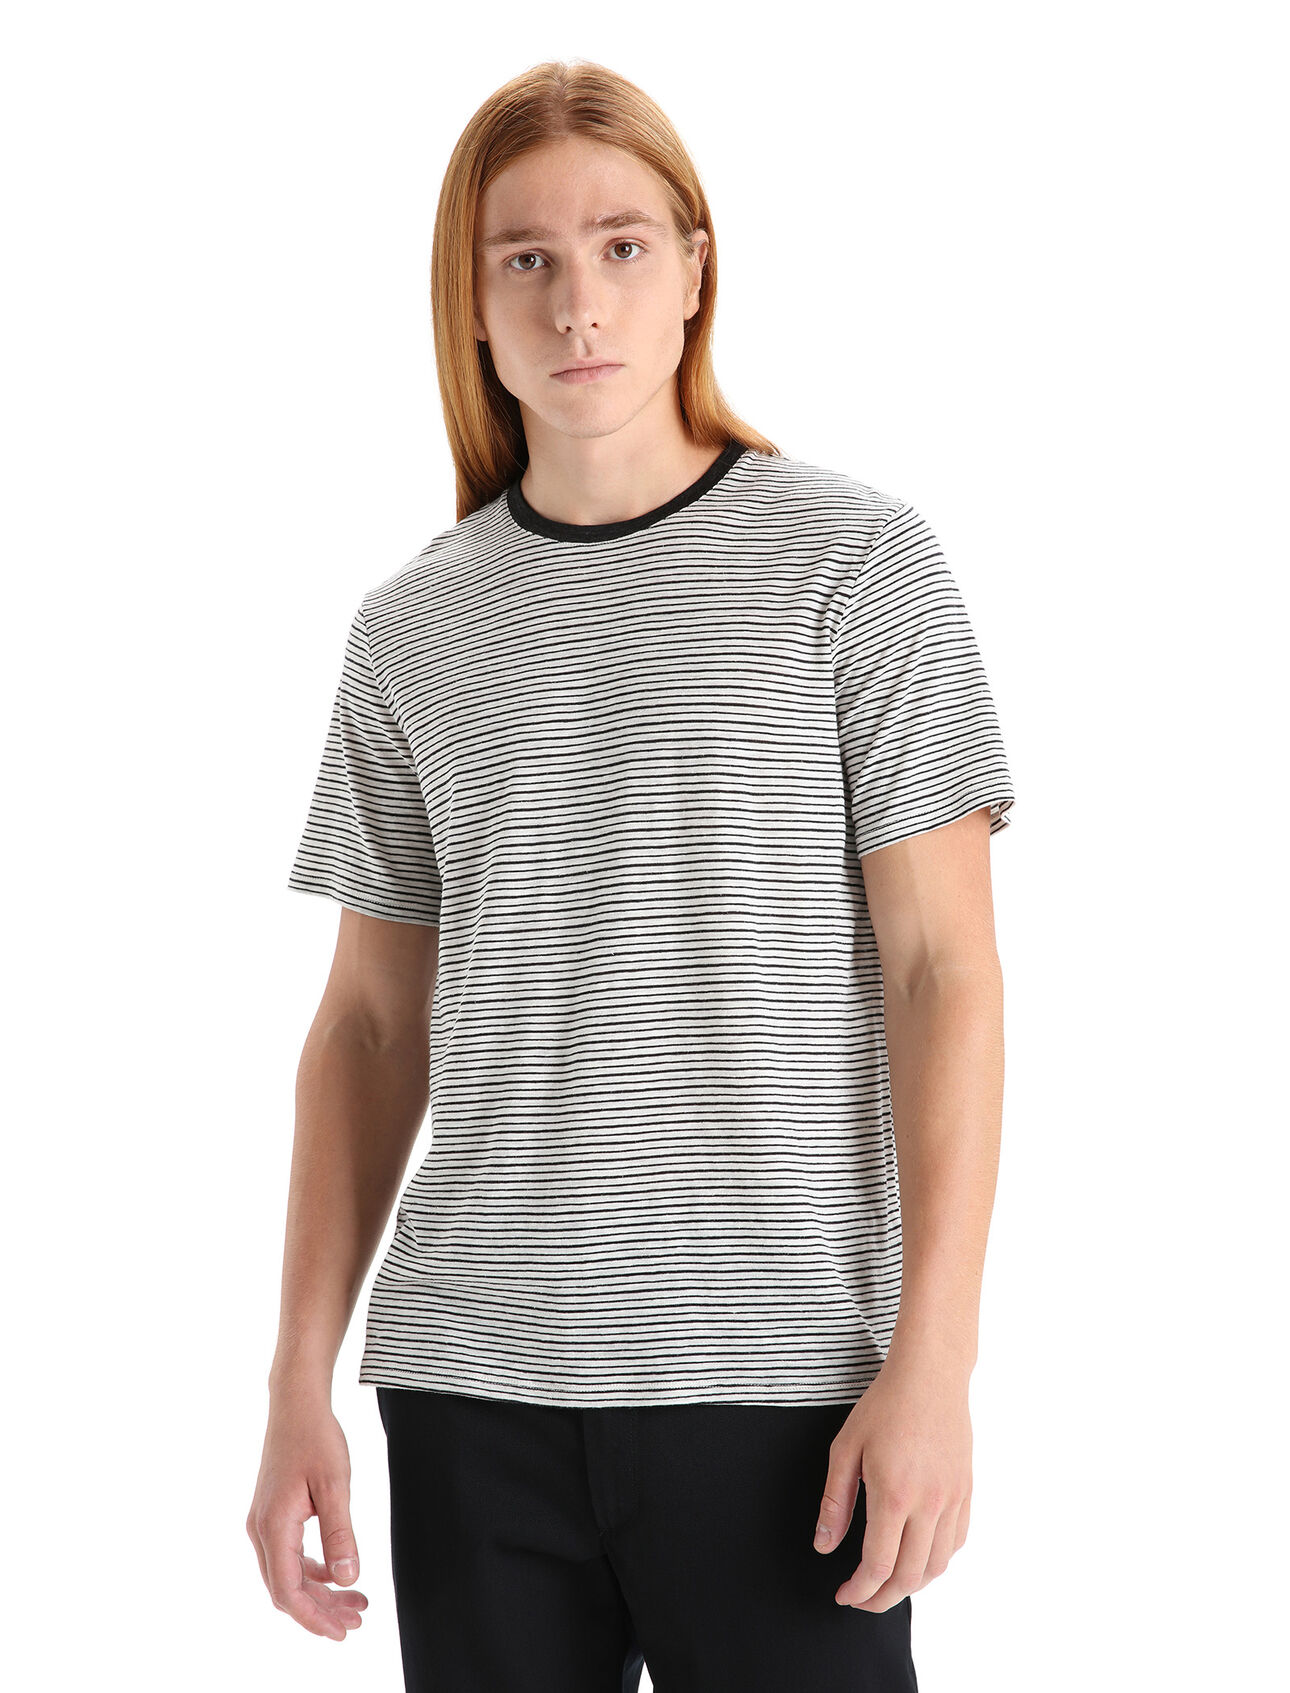 Mens Merino Linen Short Sleeve T-Shirt Stripe A lightweight, go-anywhere tee made with a soft blend of merino wool and linen, the Merino Linen Short Sleeve Tee Stripe is a staple for everyday comfort and style.